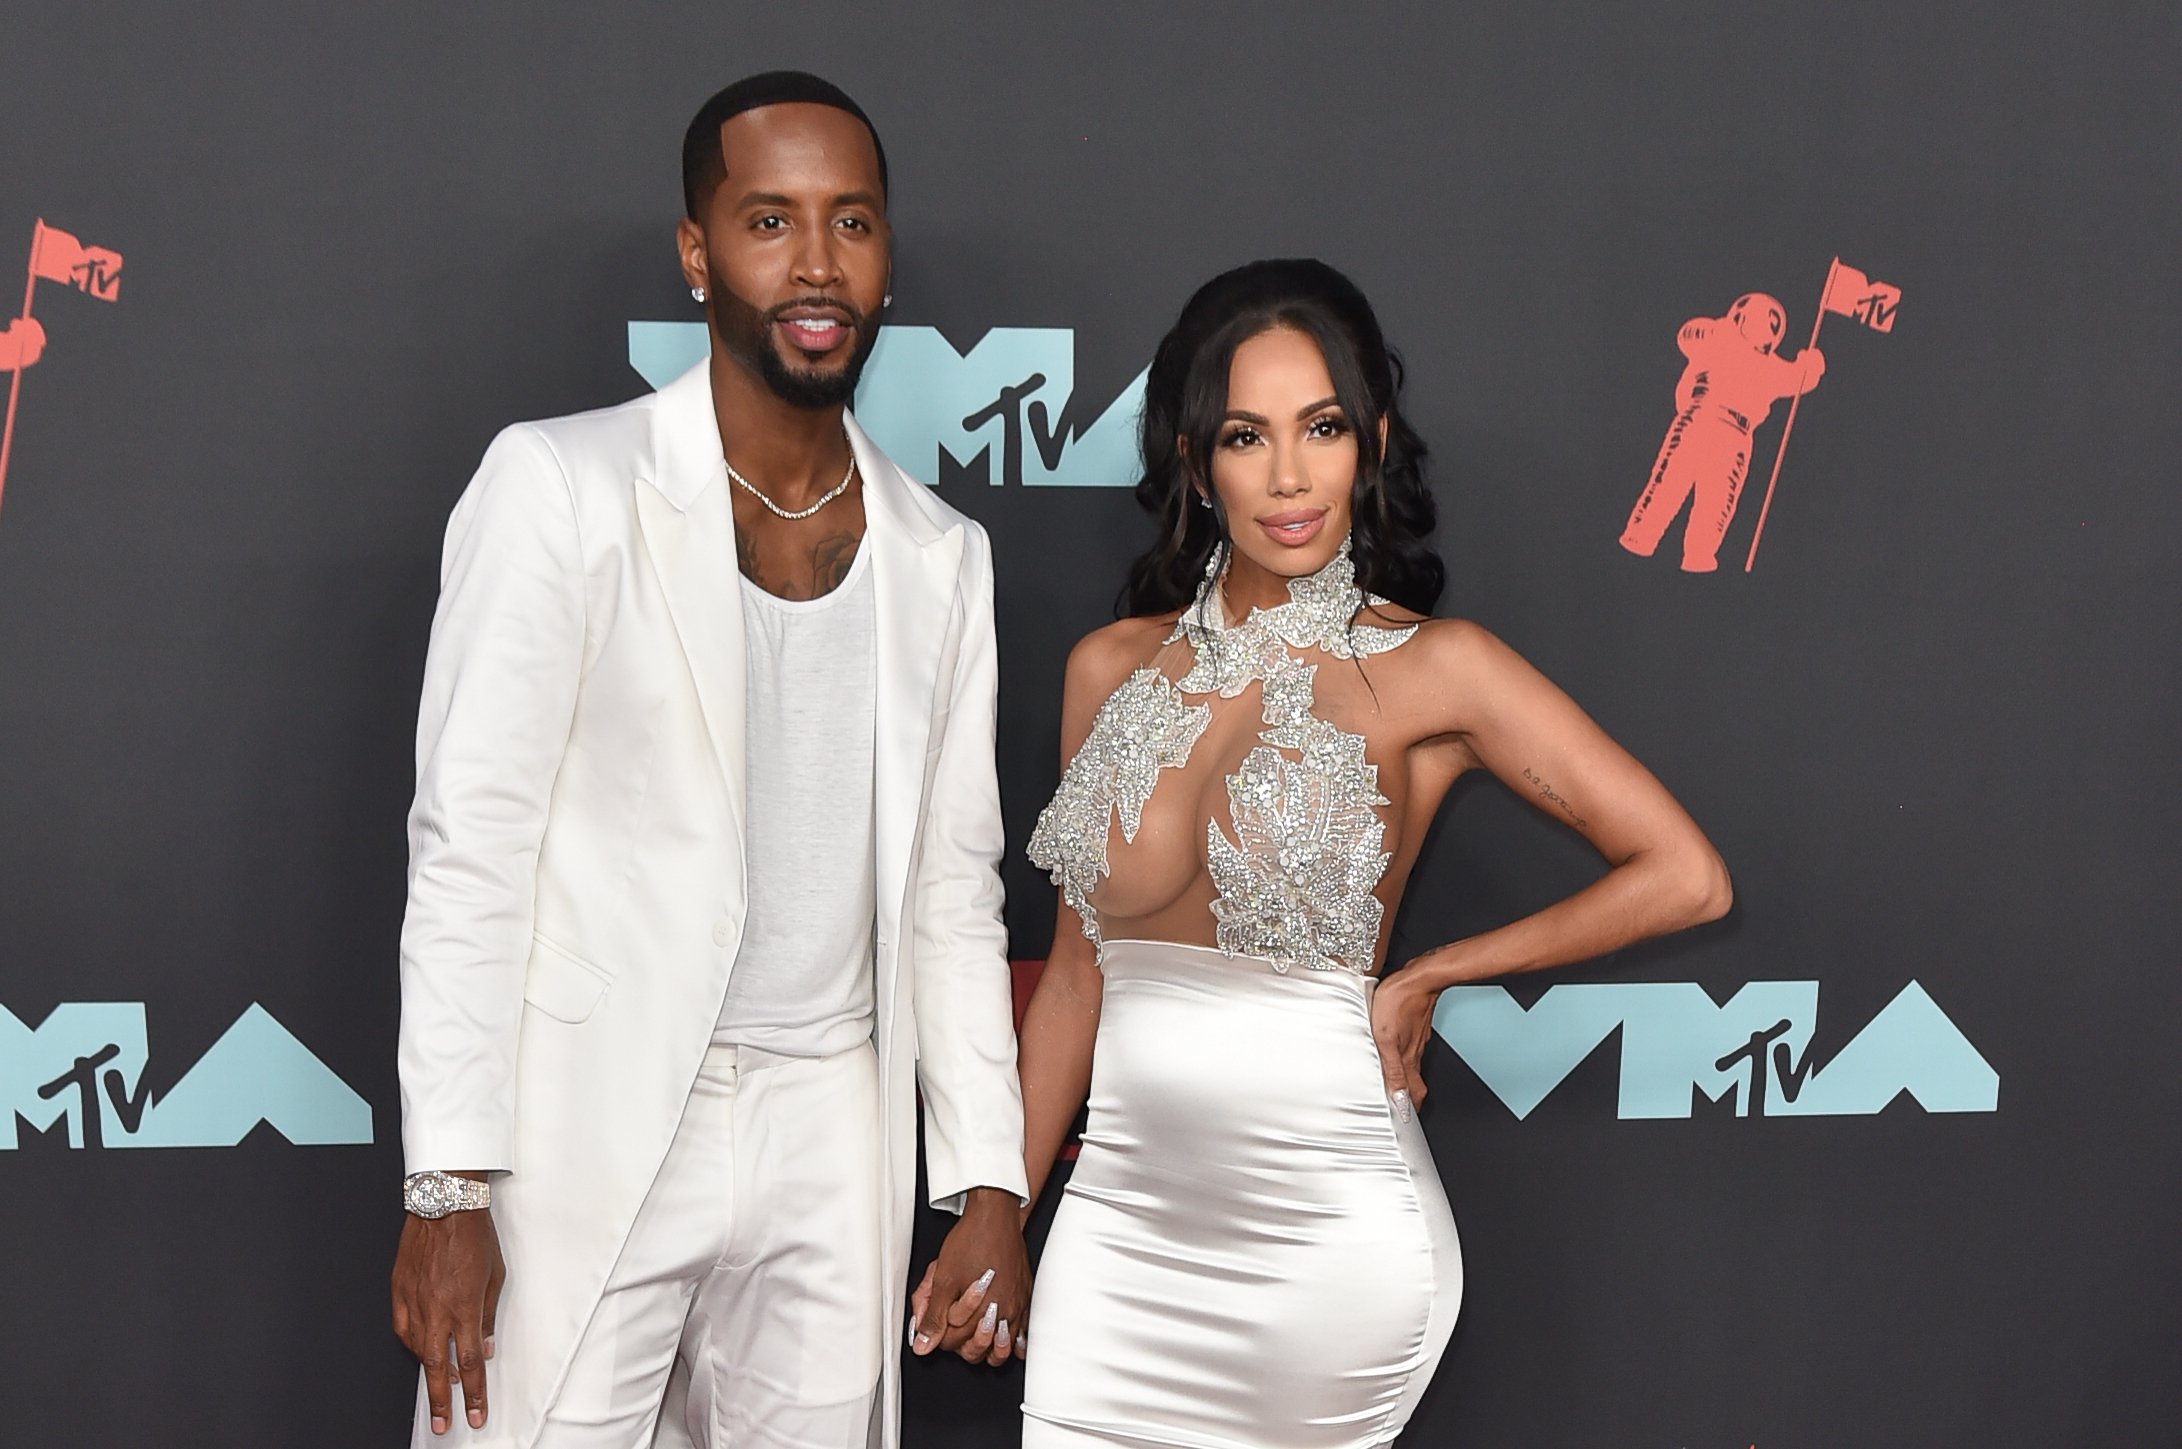 Safaree Samuels and Erica Mena Samuels at the 2019 MTV Video Music Awards in New Jersey | Source: Getty Images